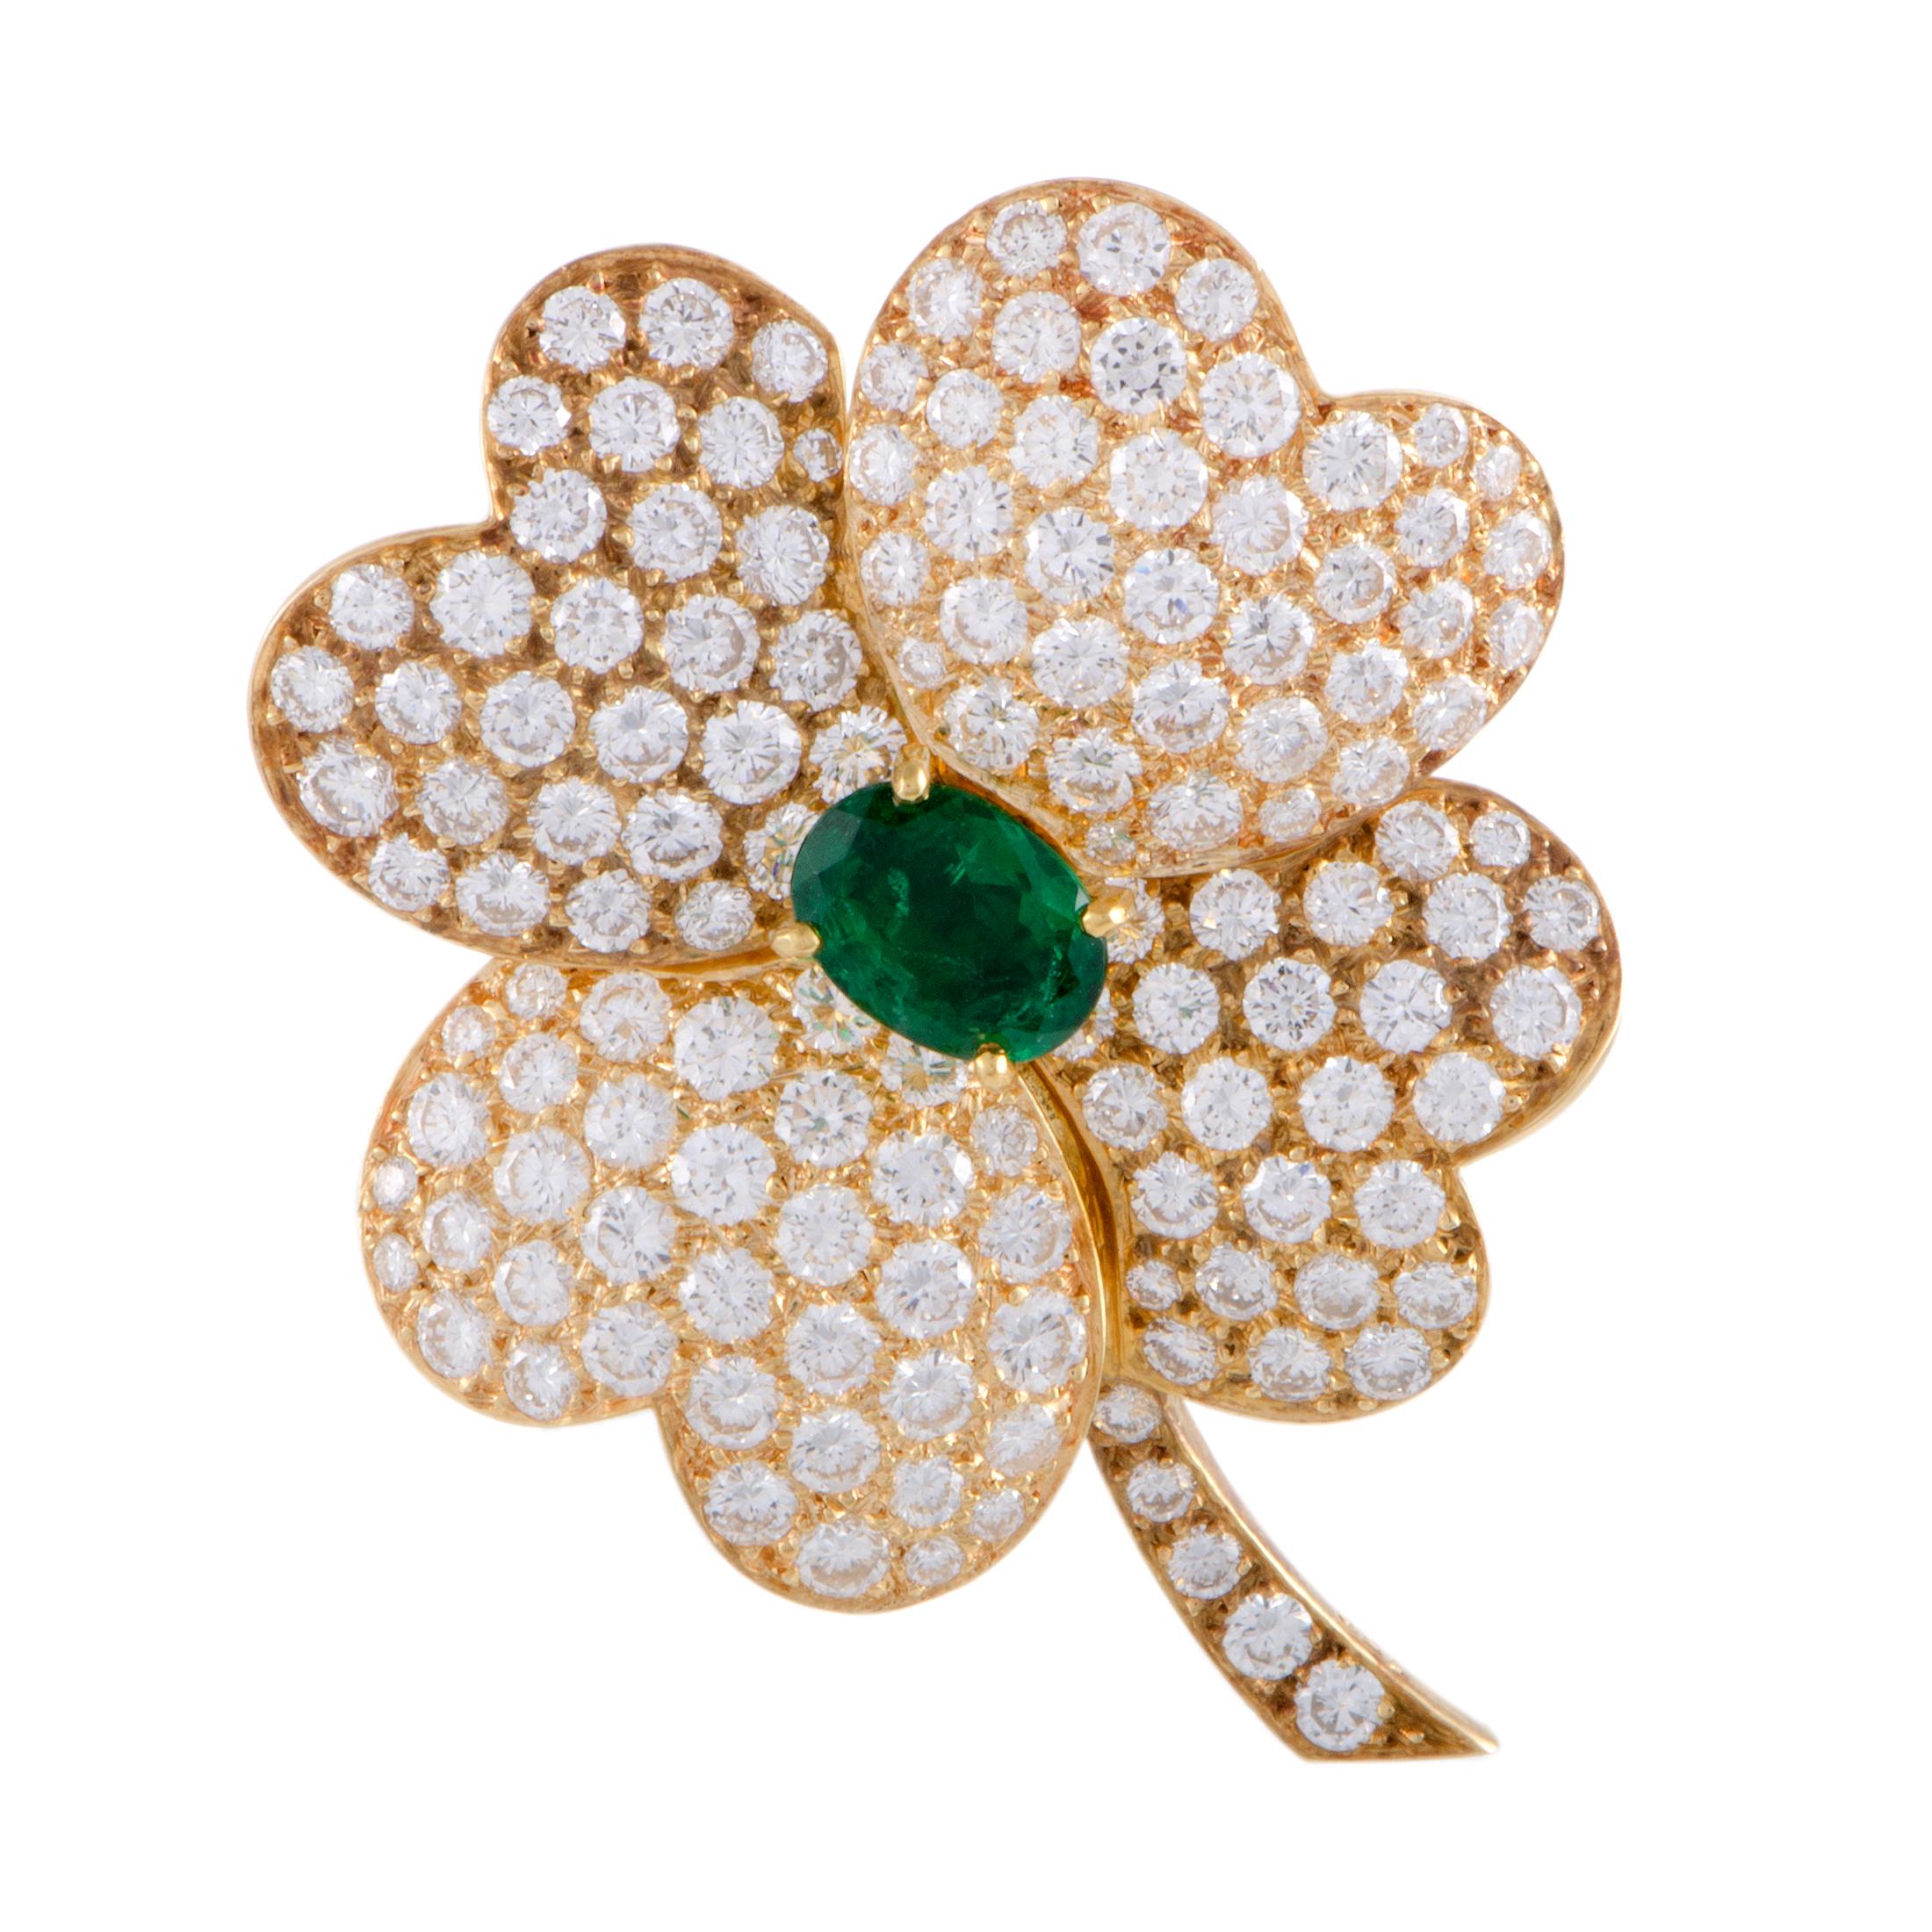 Presented by Van Cleef & Arpels within the exquisite 